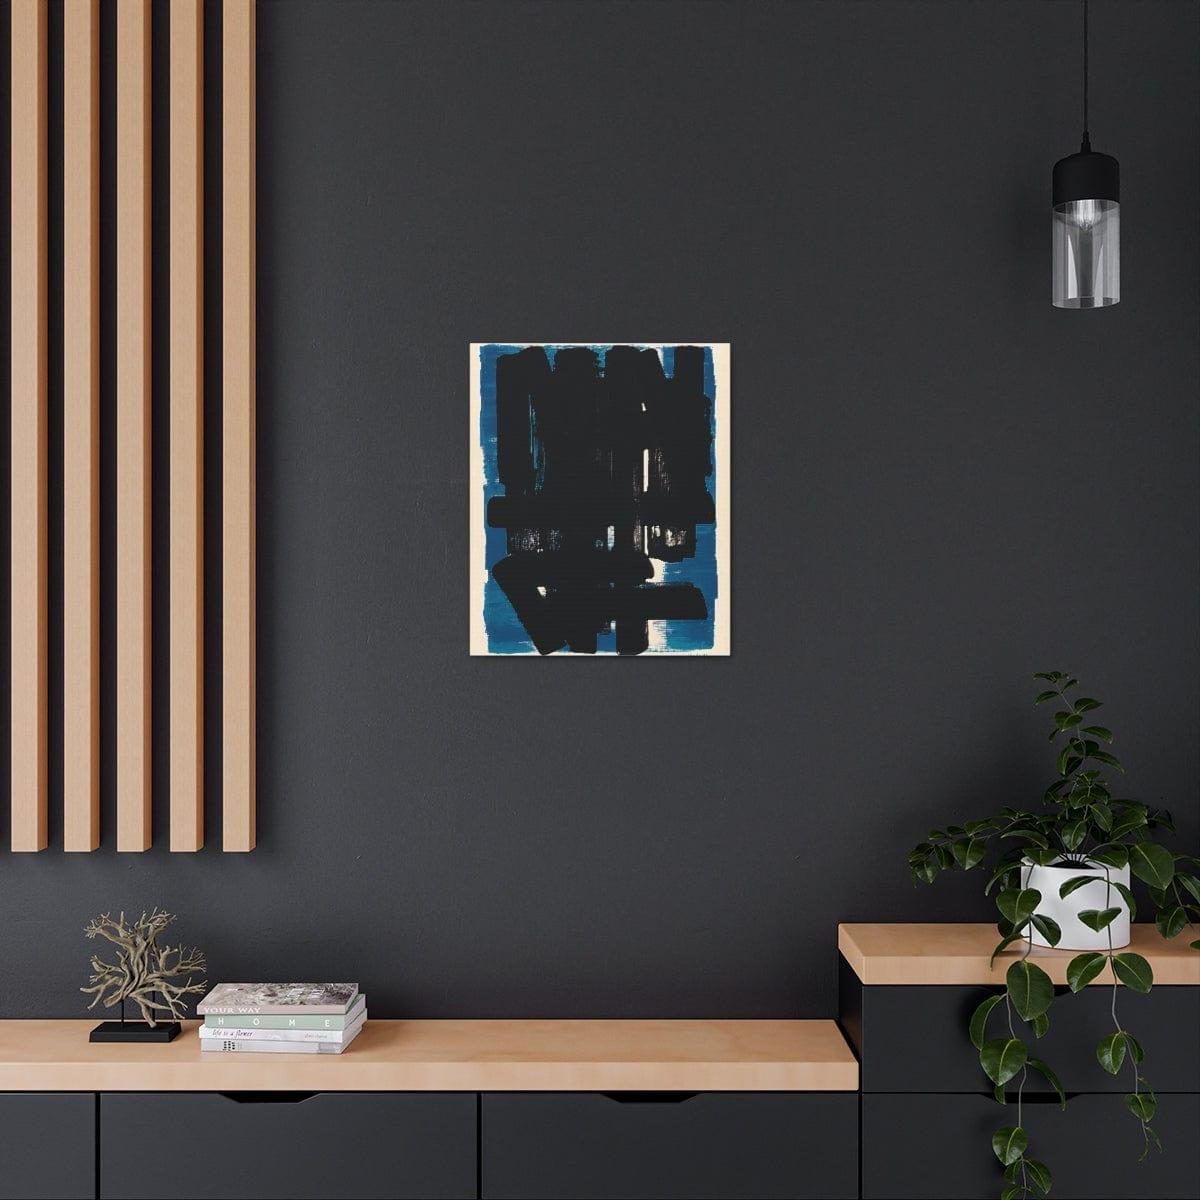 Lithographie n° 5 by Pierre Soulages - DECOROOM